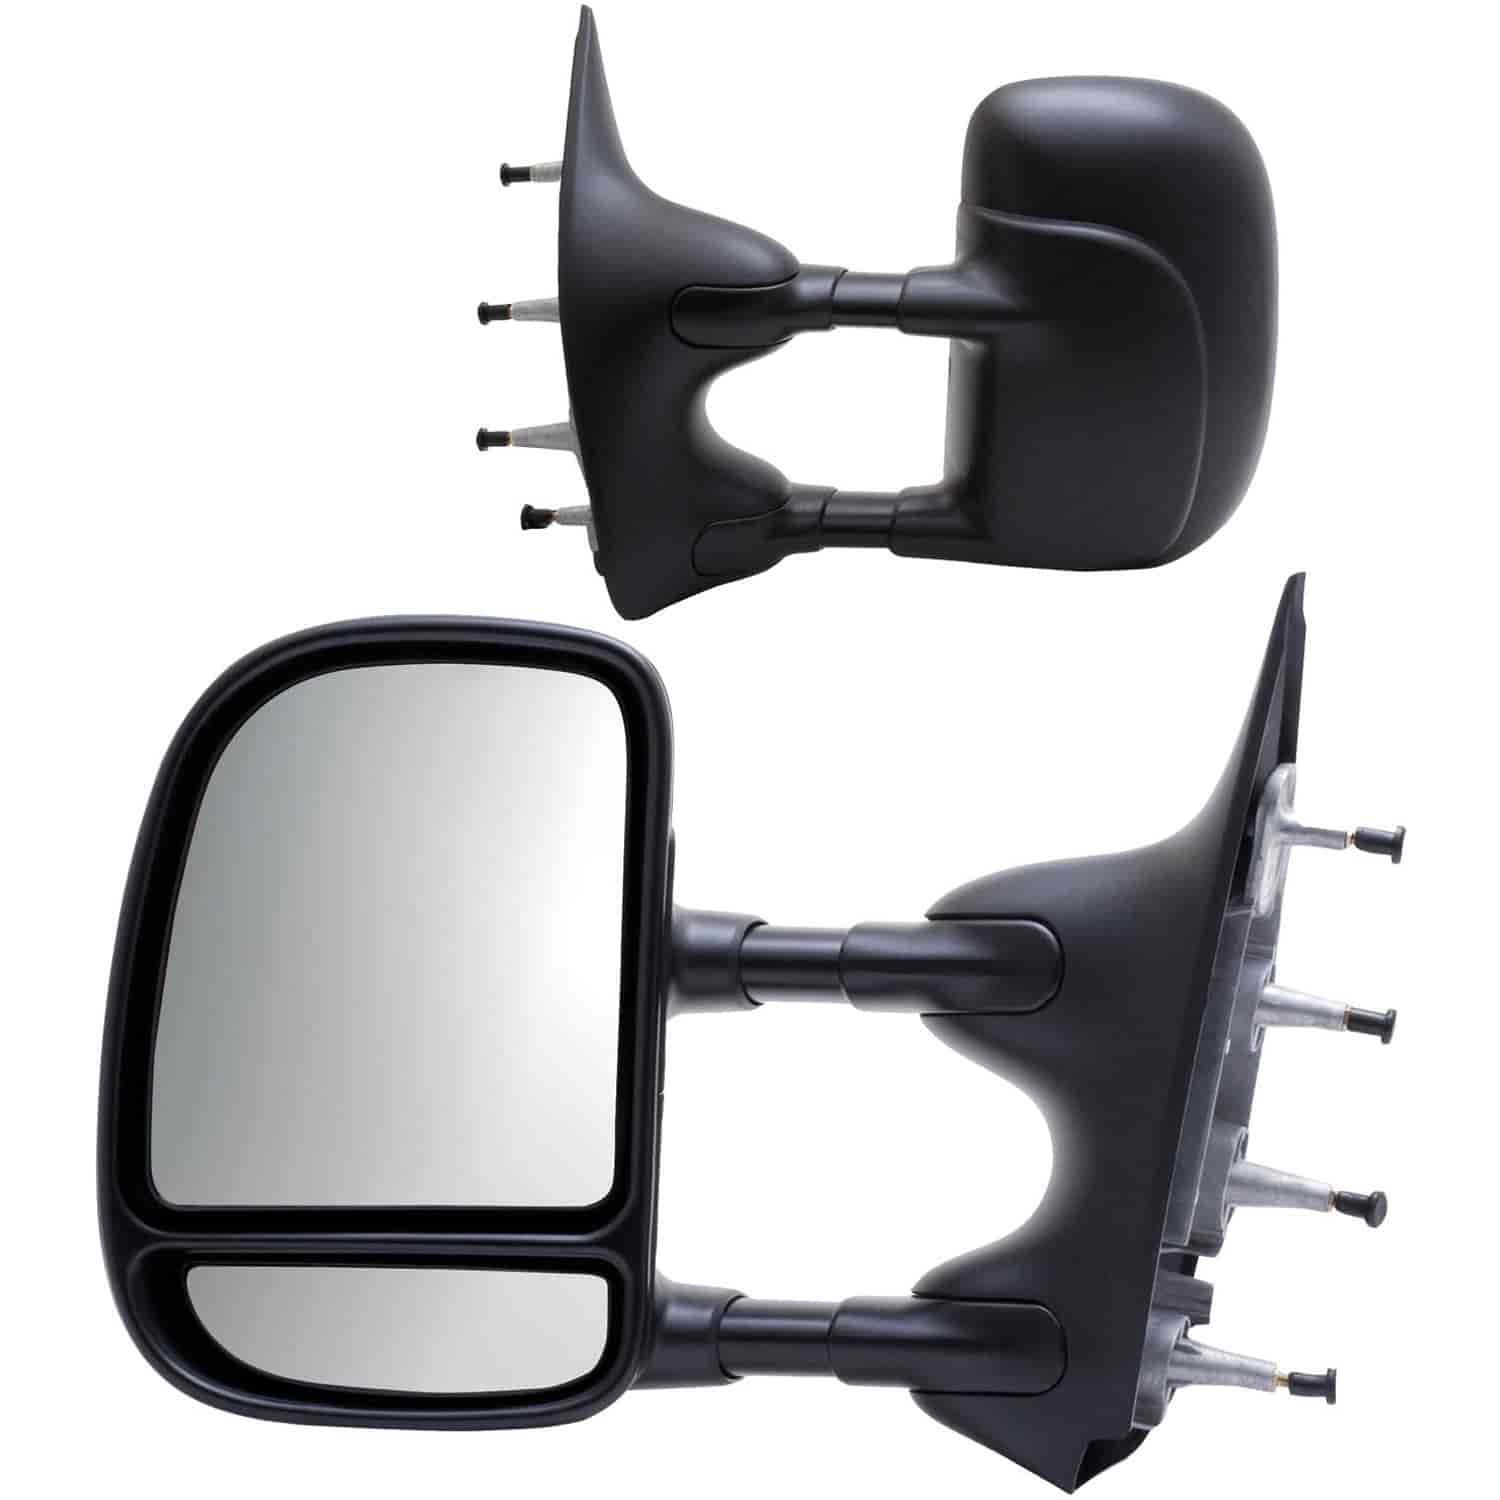 OEM Style Replacement mirror set for 2002-2014 Ford Econoline Van